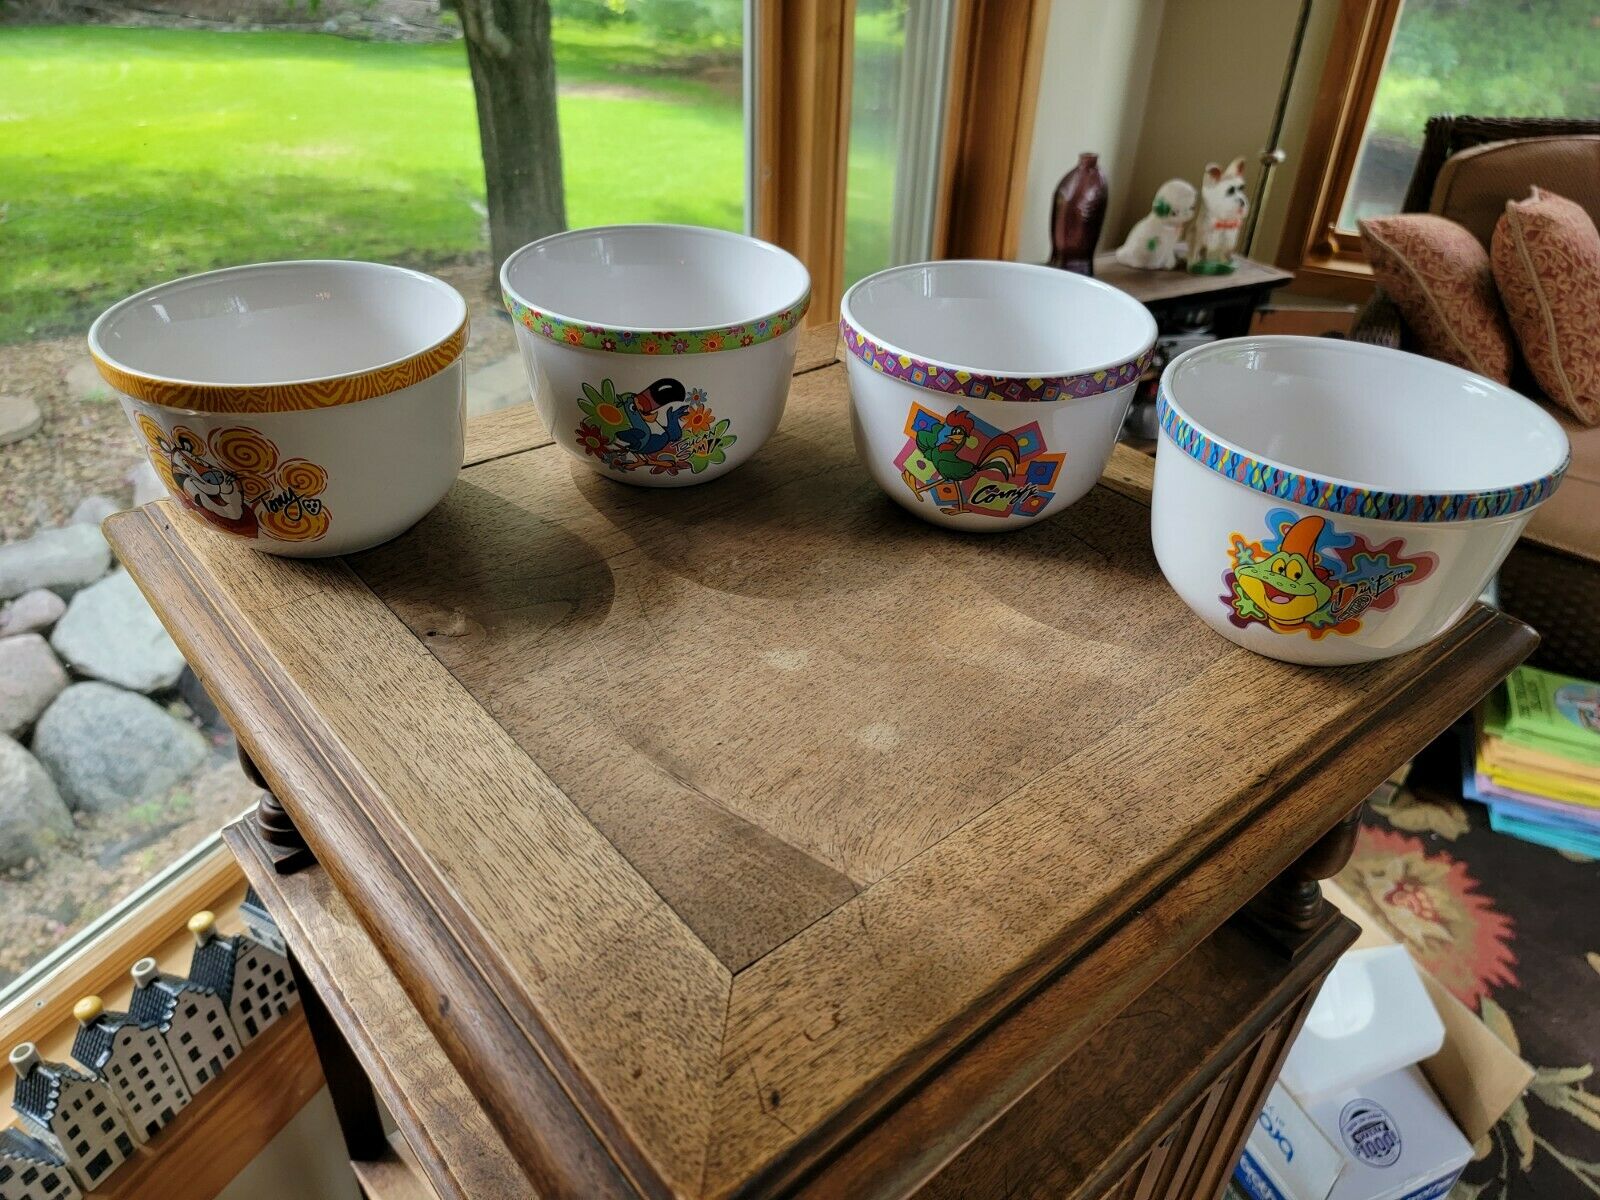 2002 Kellogg Characters Set Of 4 Ceramic 5.5" Cereal Bowl Houston Harvest Gifts